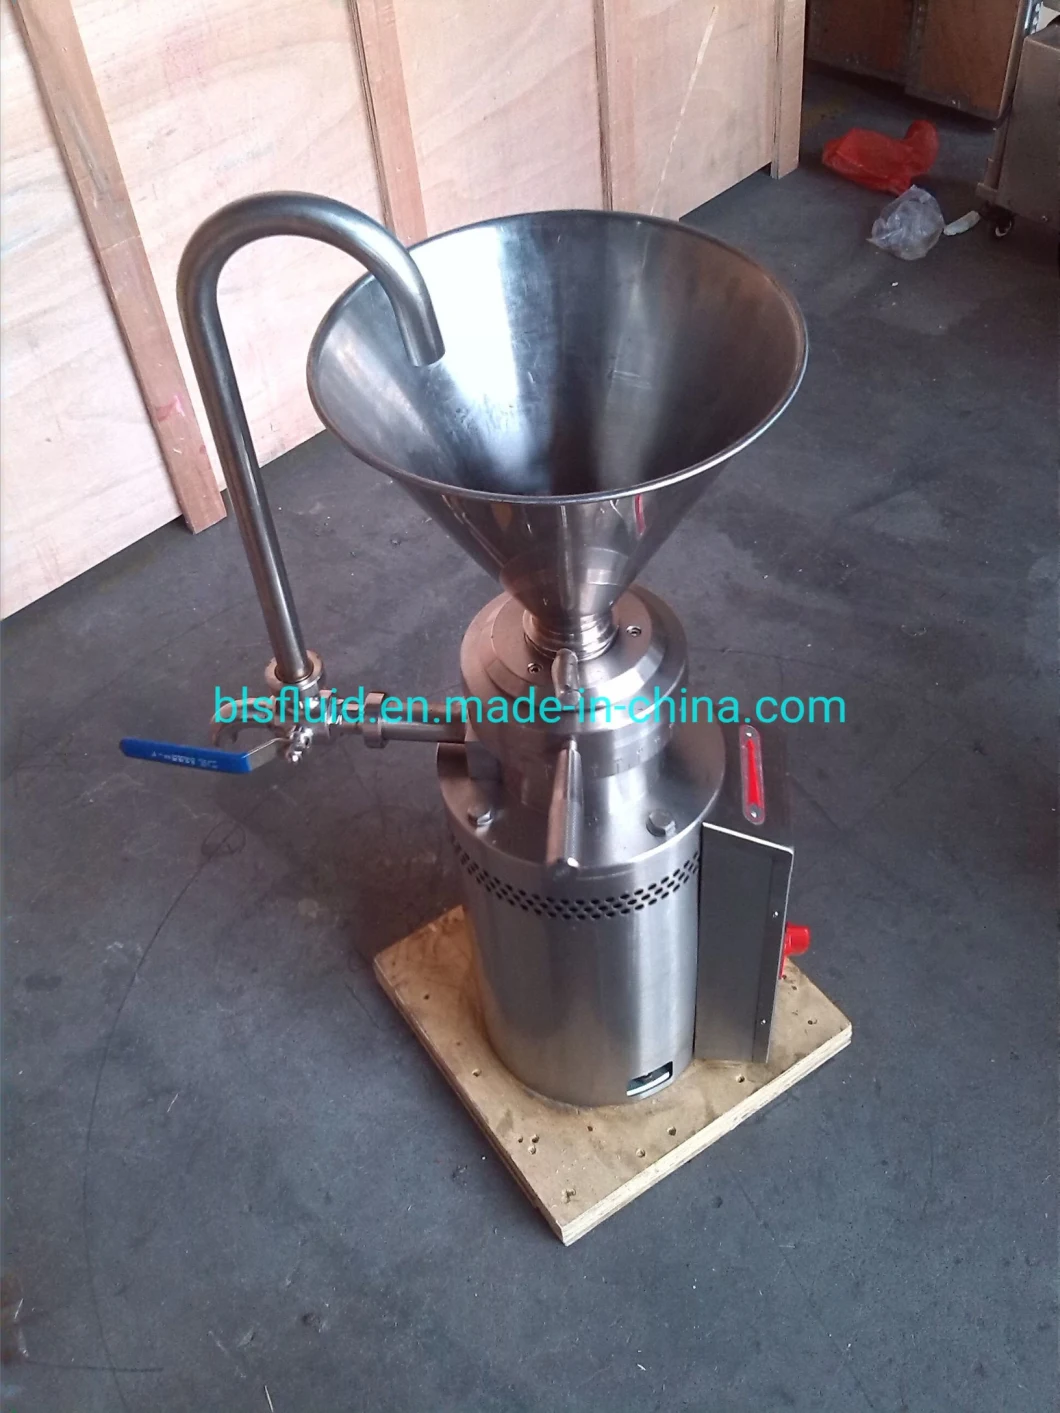 Food Grade Stainless Steel Nuts, Butter, Jam, Spice Grinding Machine